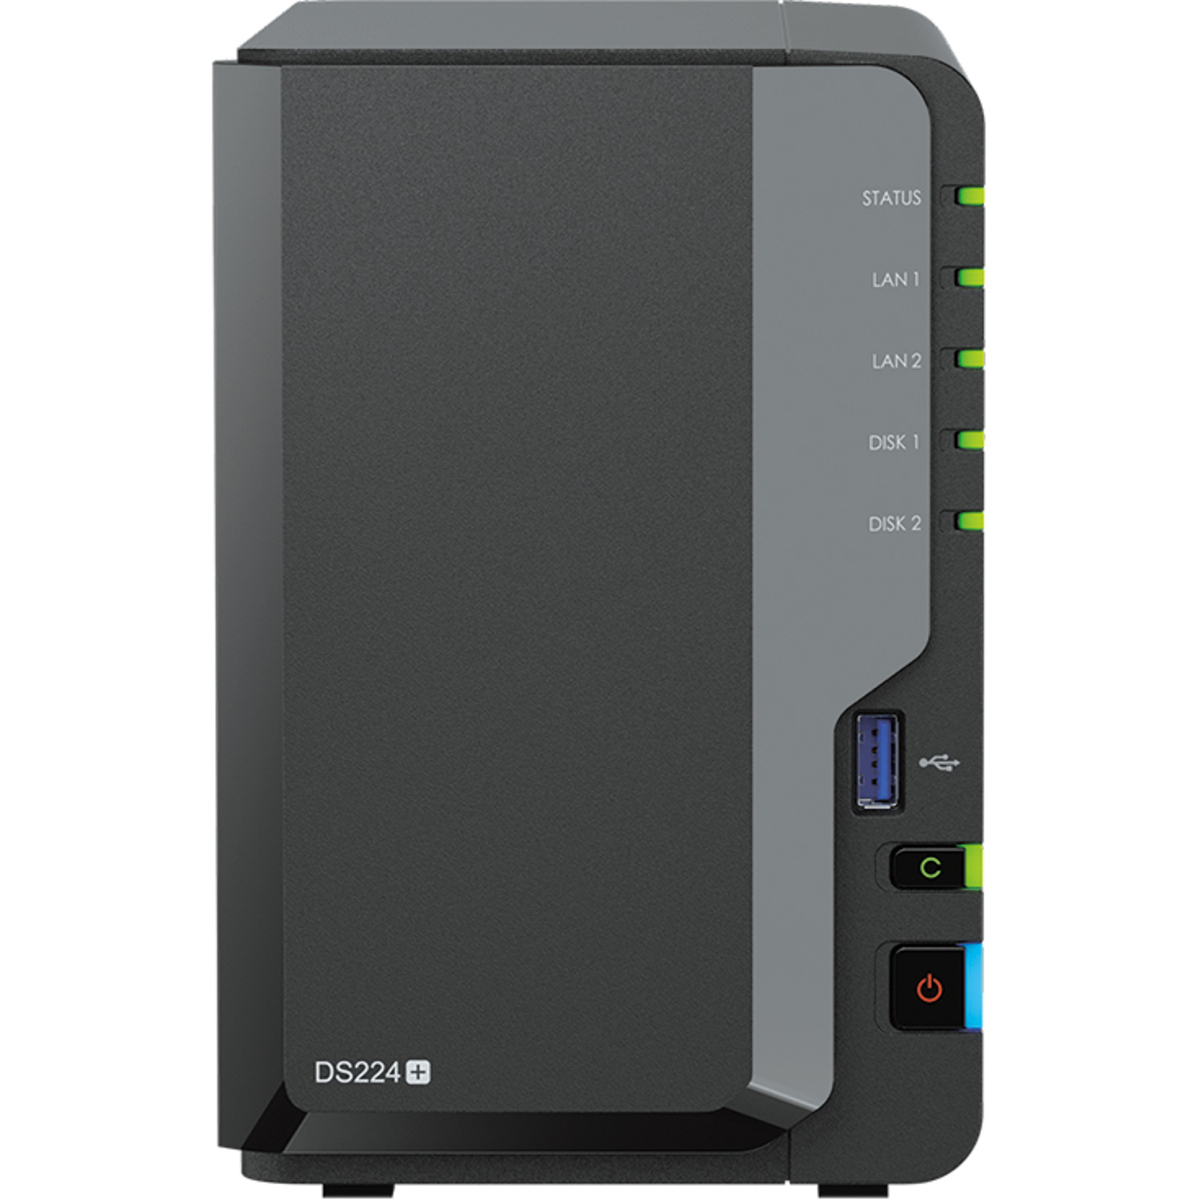 Synology DiskStation DS224+ 4tb 2-Bay Desktop Personal / Basic Home / Small Office NAS - Network Attached Storage Device 2x2tb Samsung 870 EVO MZ-77E2T0BAM 2.5 560/530MB/s SATA 6Gb/s SSD CONSUMER Class Drives Installed - Burn-In Tested - ON SALE - FREE RAM UPGRADE DiskStation DS224+